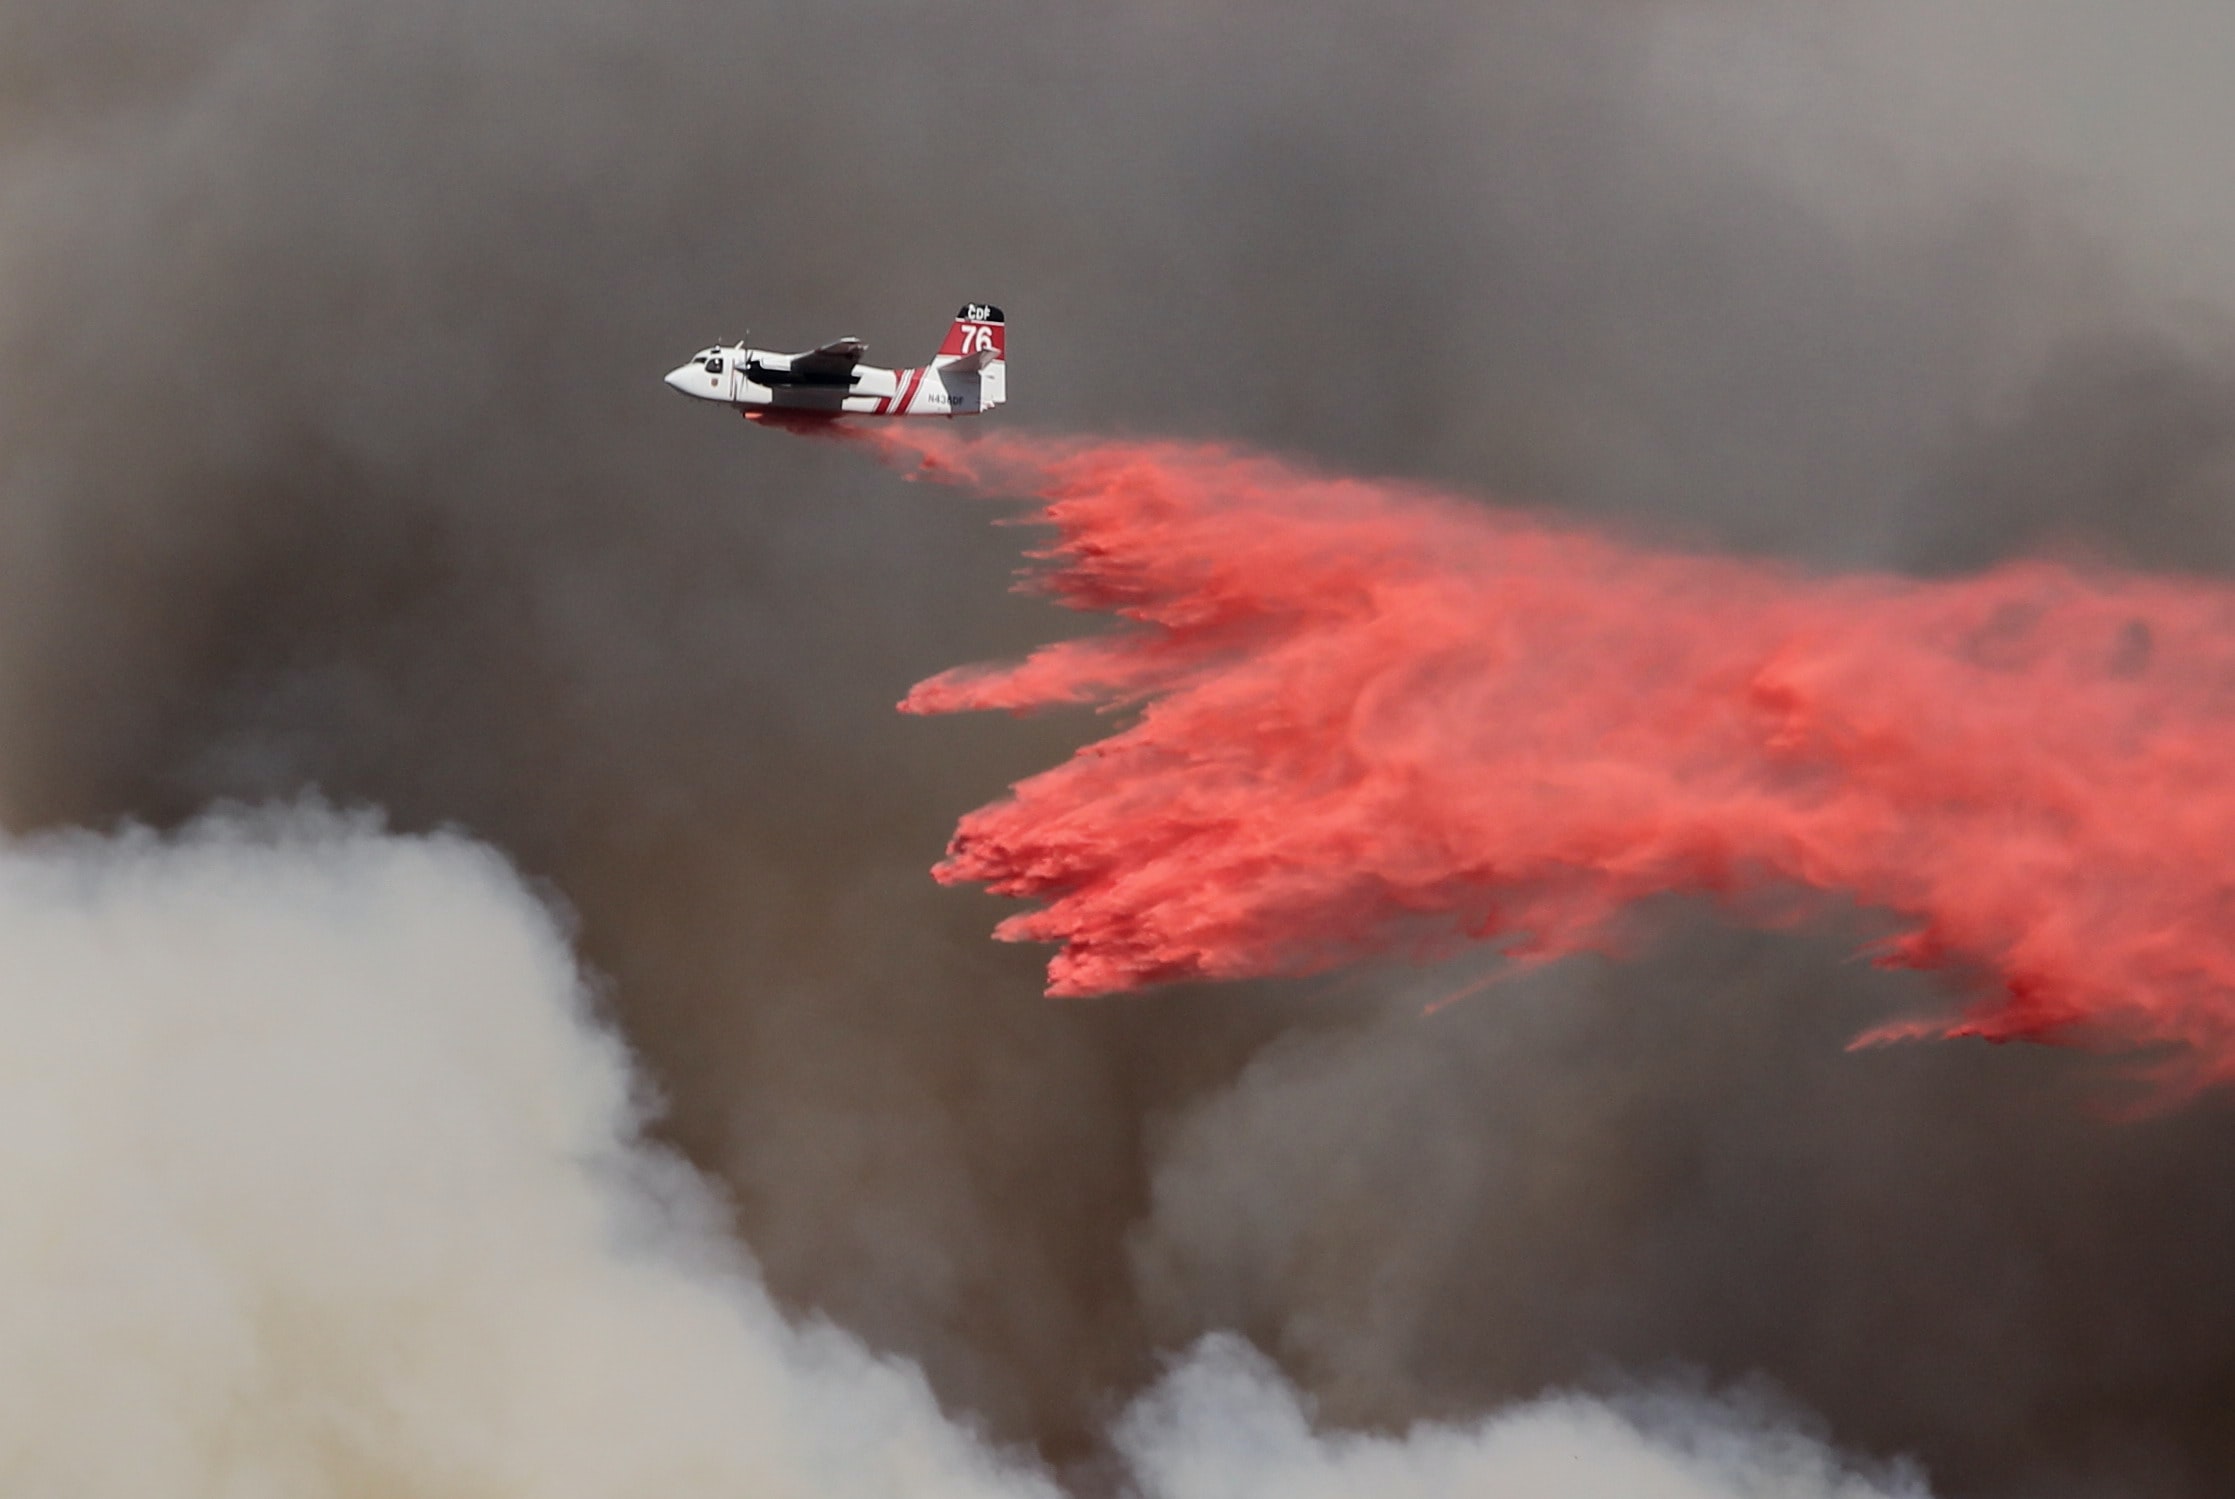 wildfire plane dousing fires with chemicals